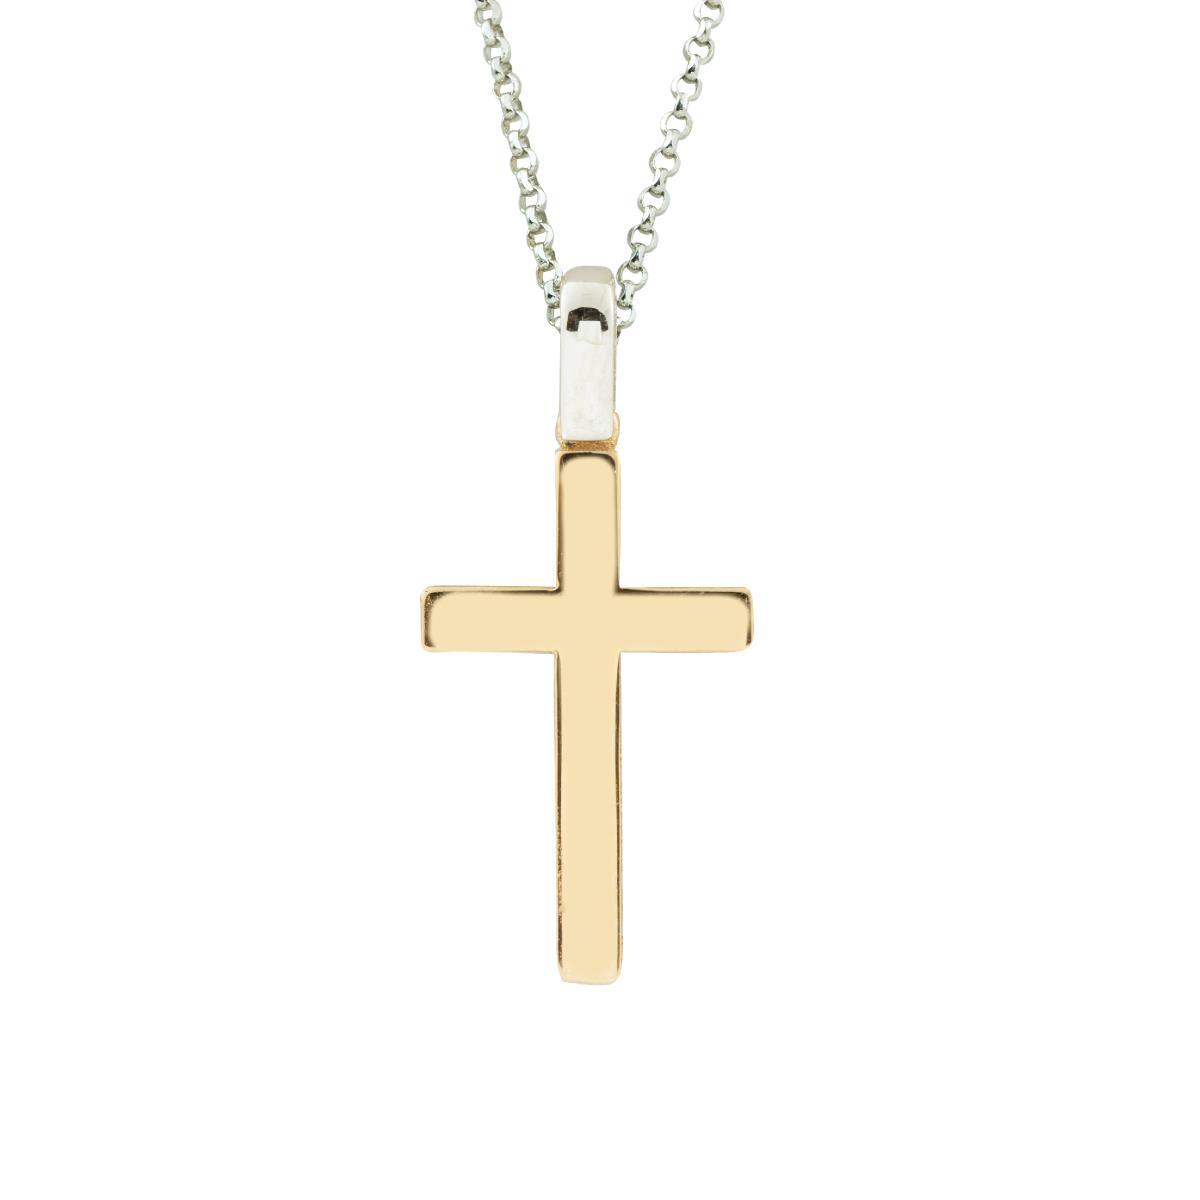 Necklace with white gold chain and 18kt yellow gold cross - CEA2477-LO